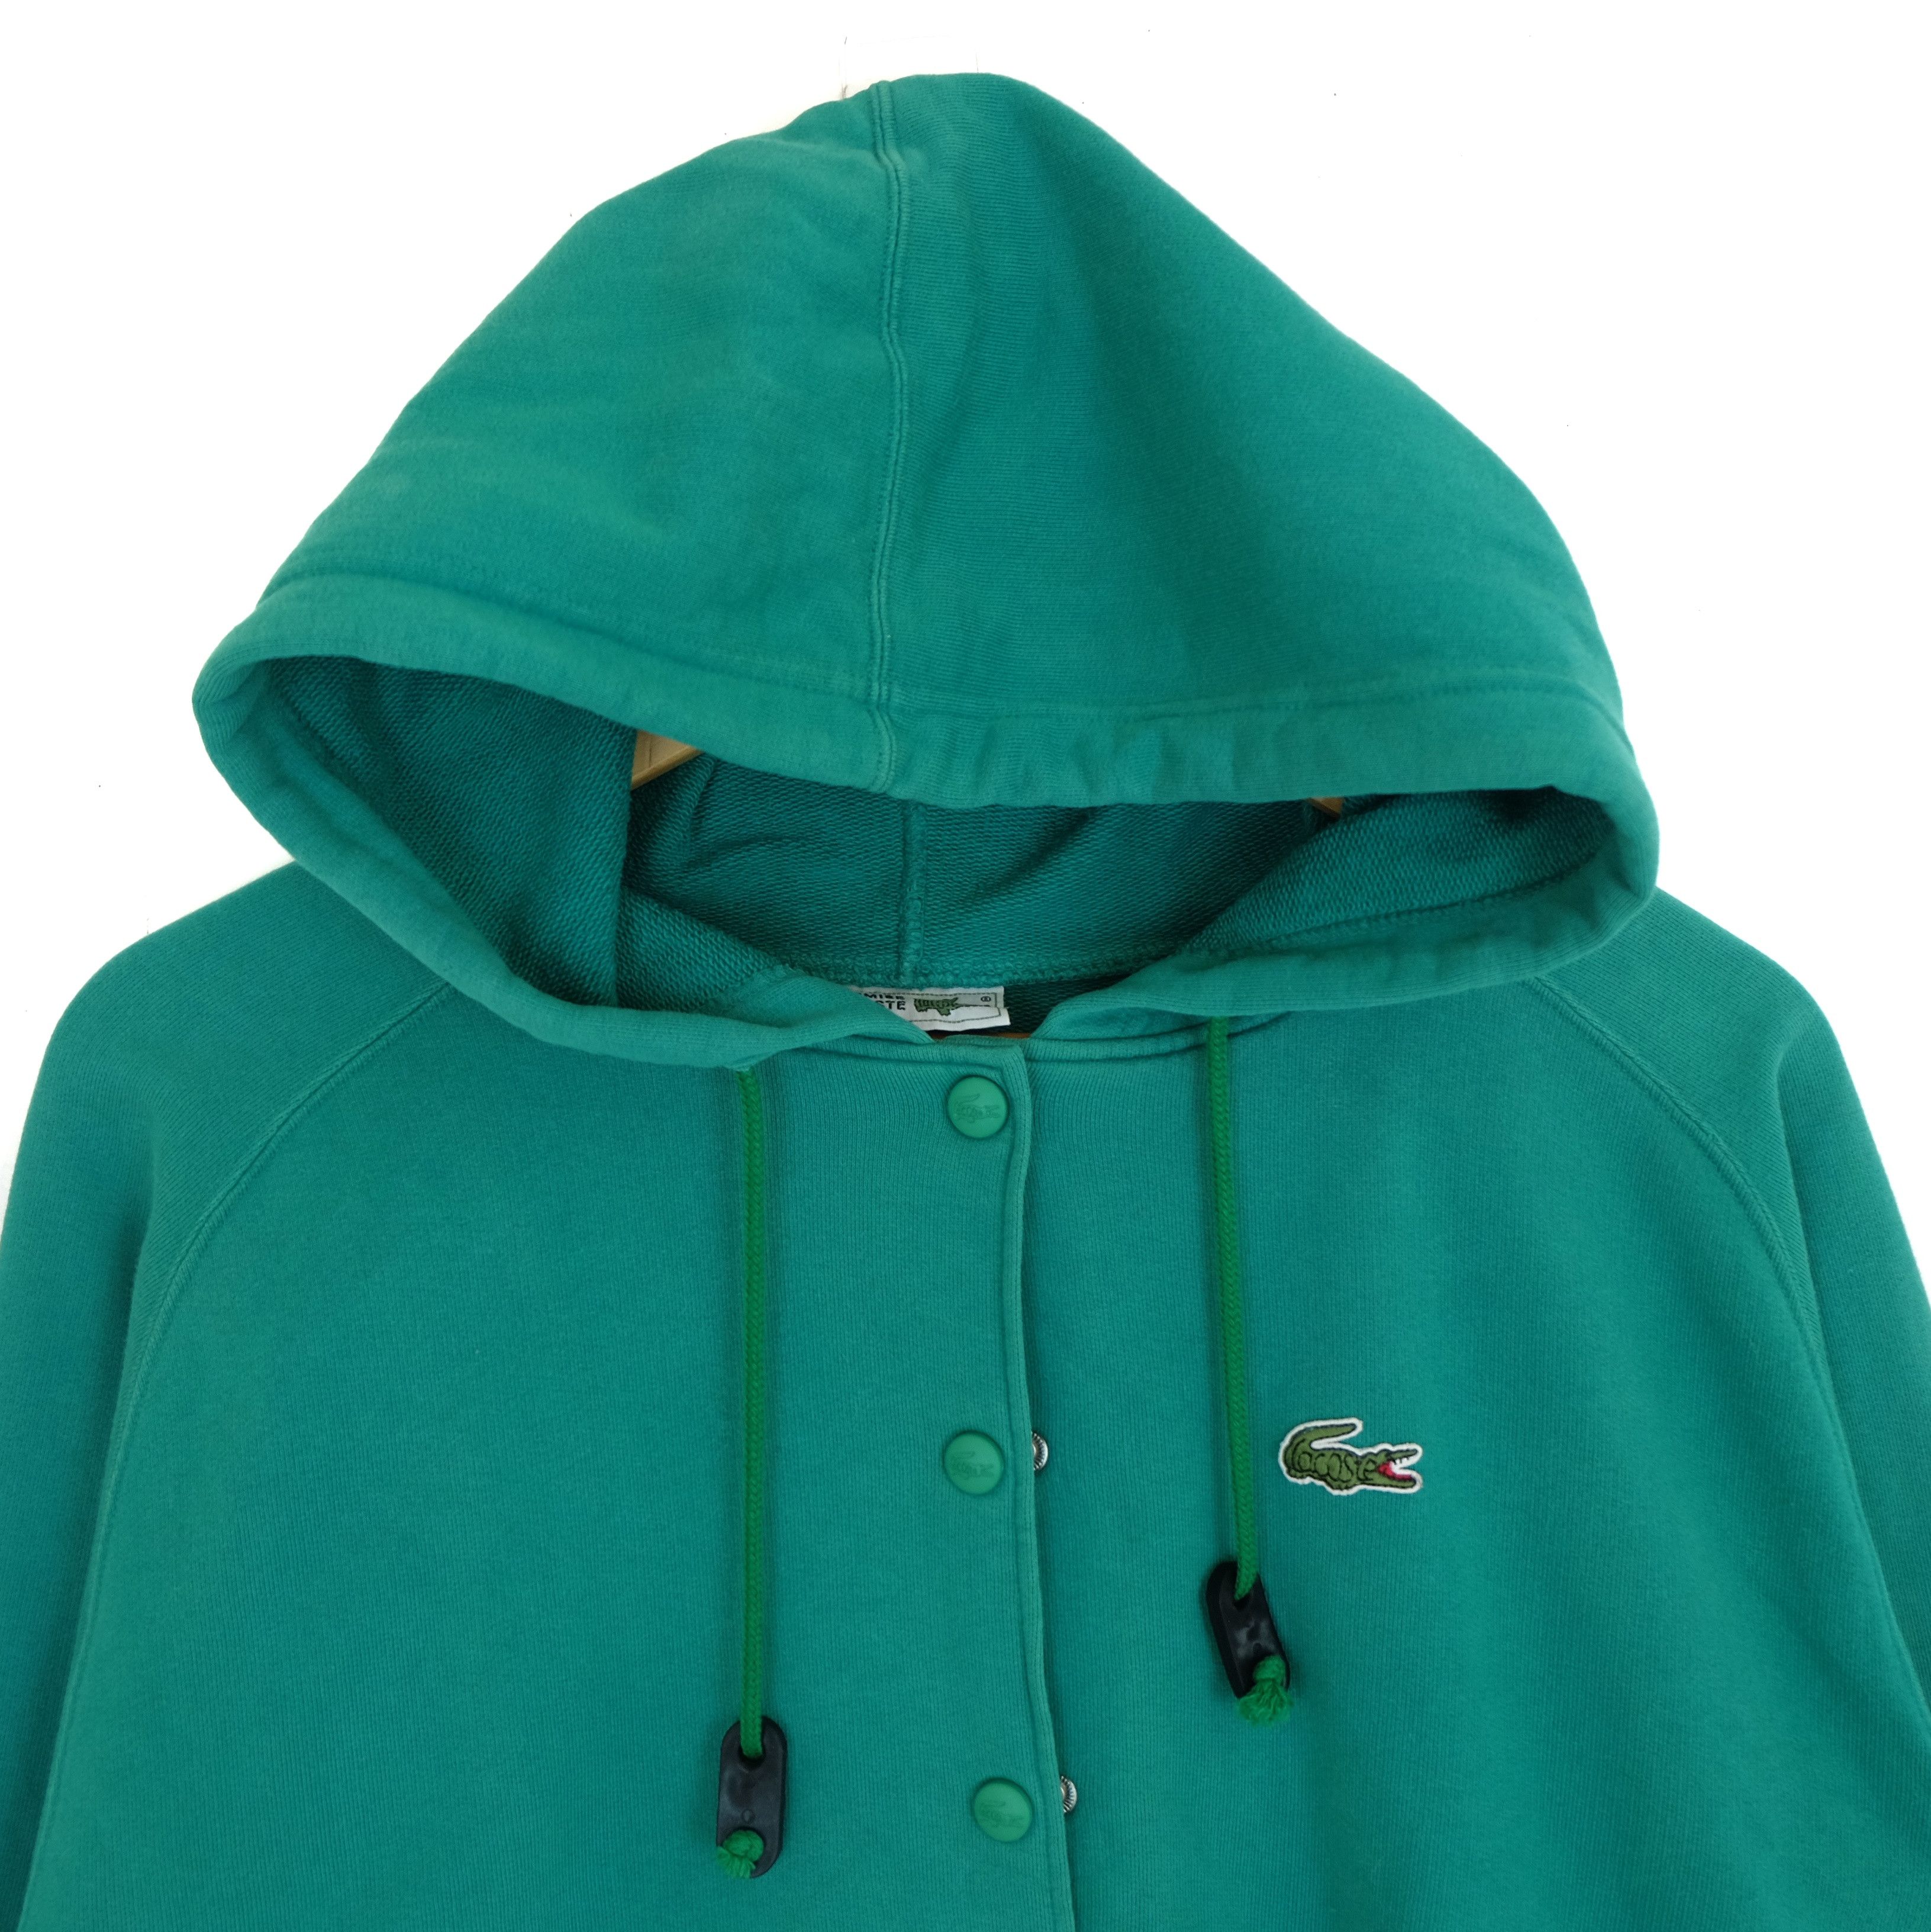 Lacoste LACOSTE Big Spell Out Logo Hoodie Size XL / US 12-14 / IT 48-50 - 3 Thumbnail